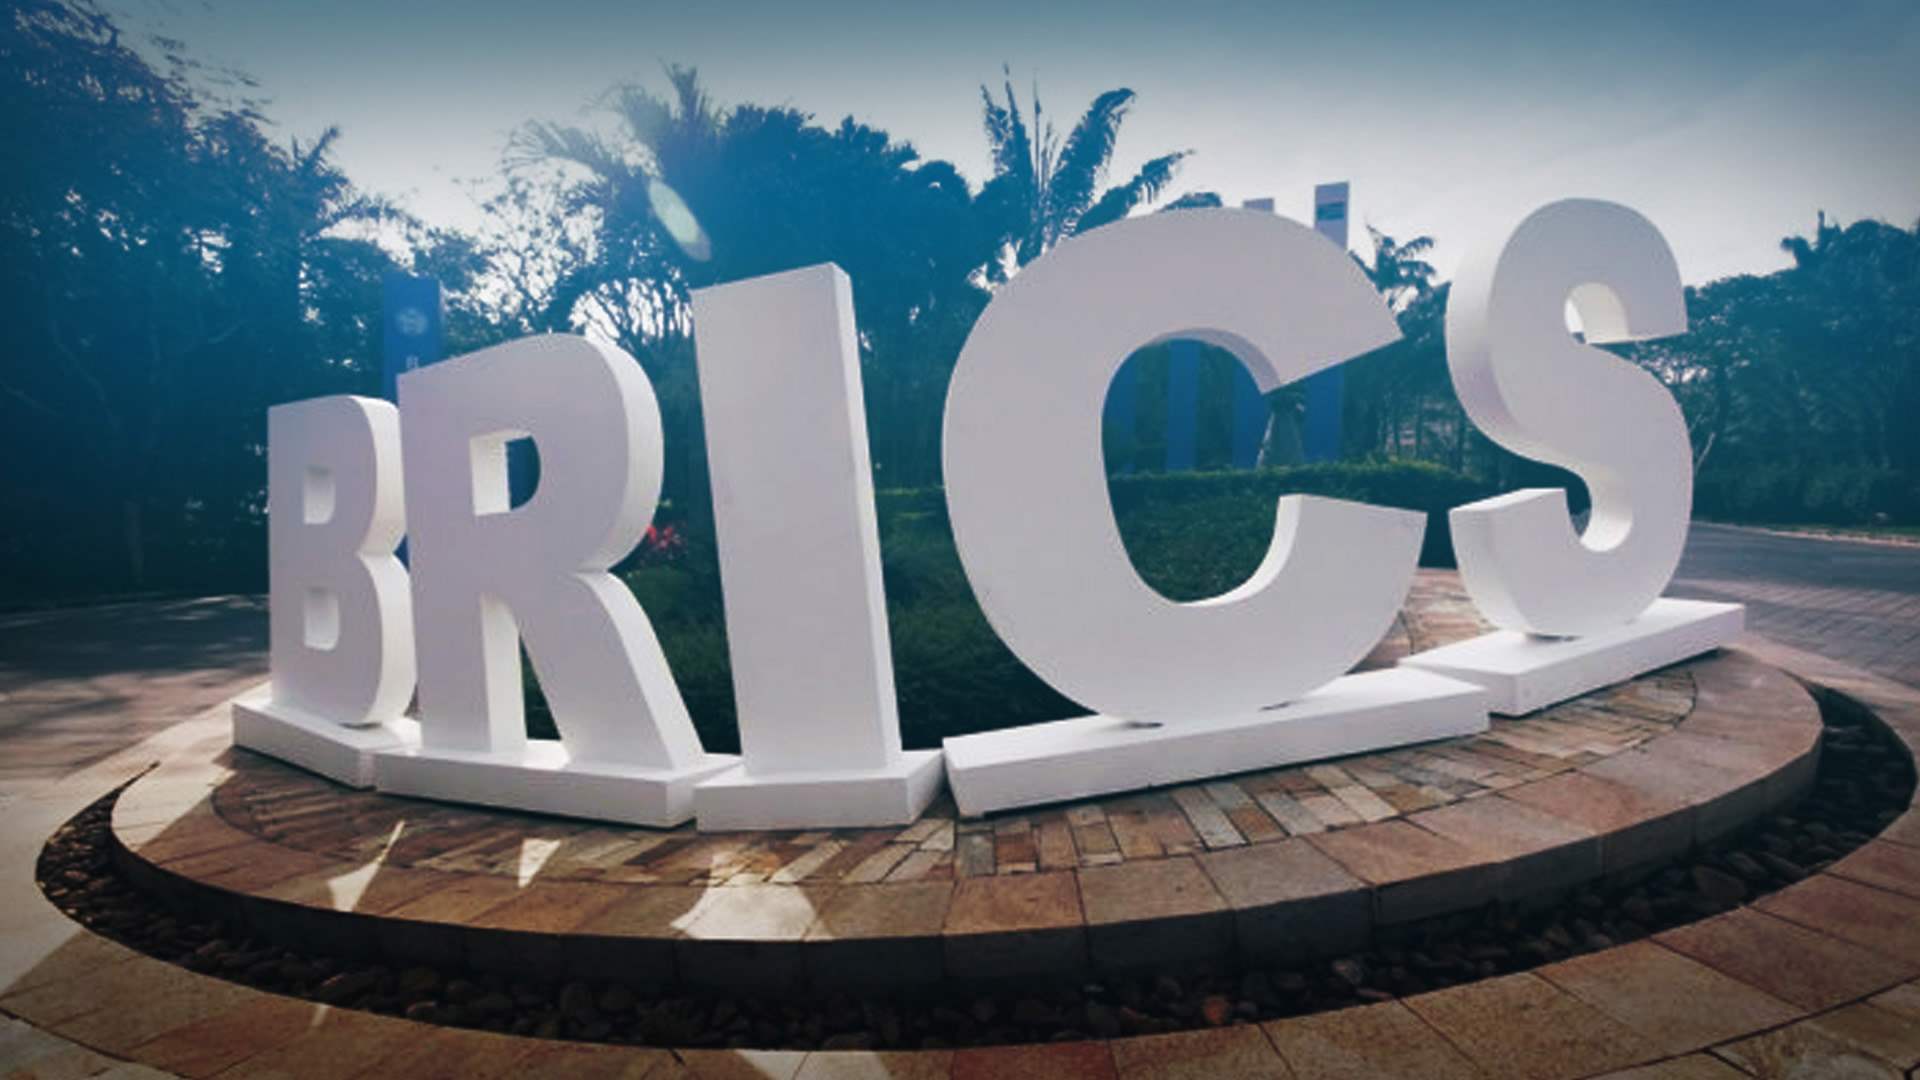 South Africa: 22 countries have requested to join the BRICS group